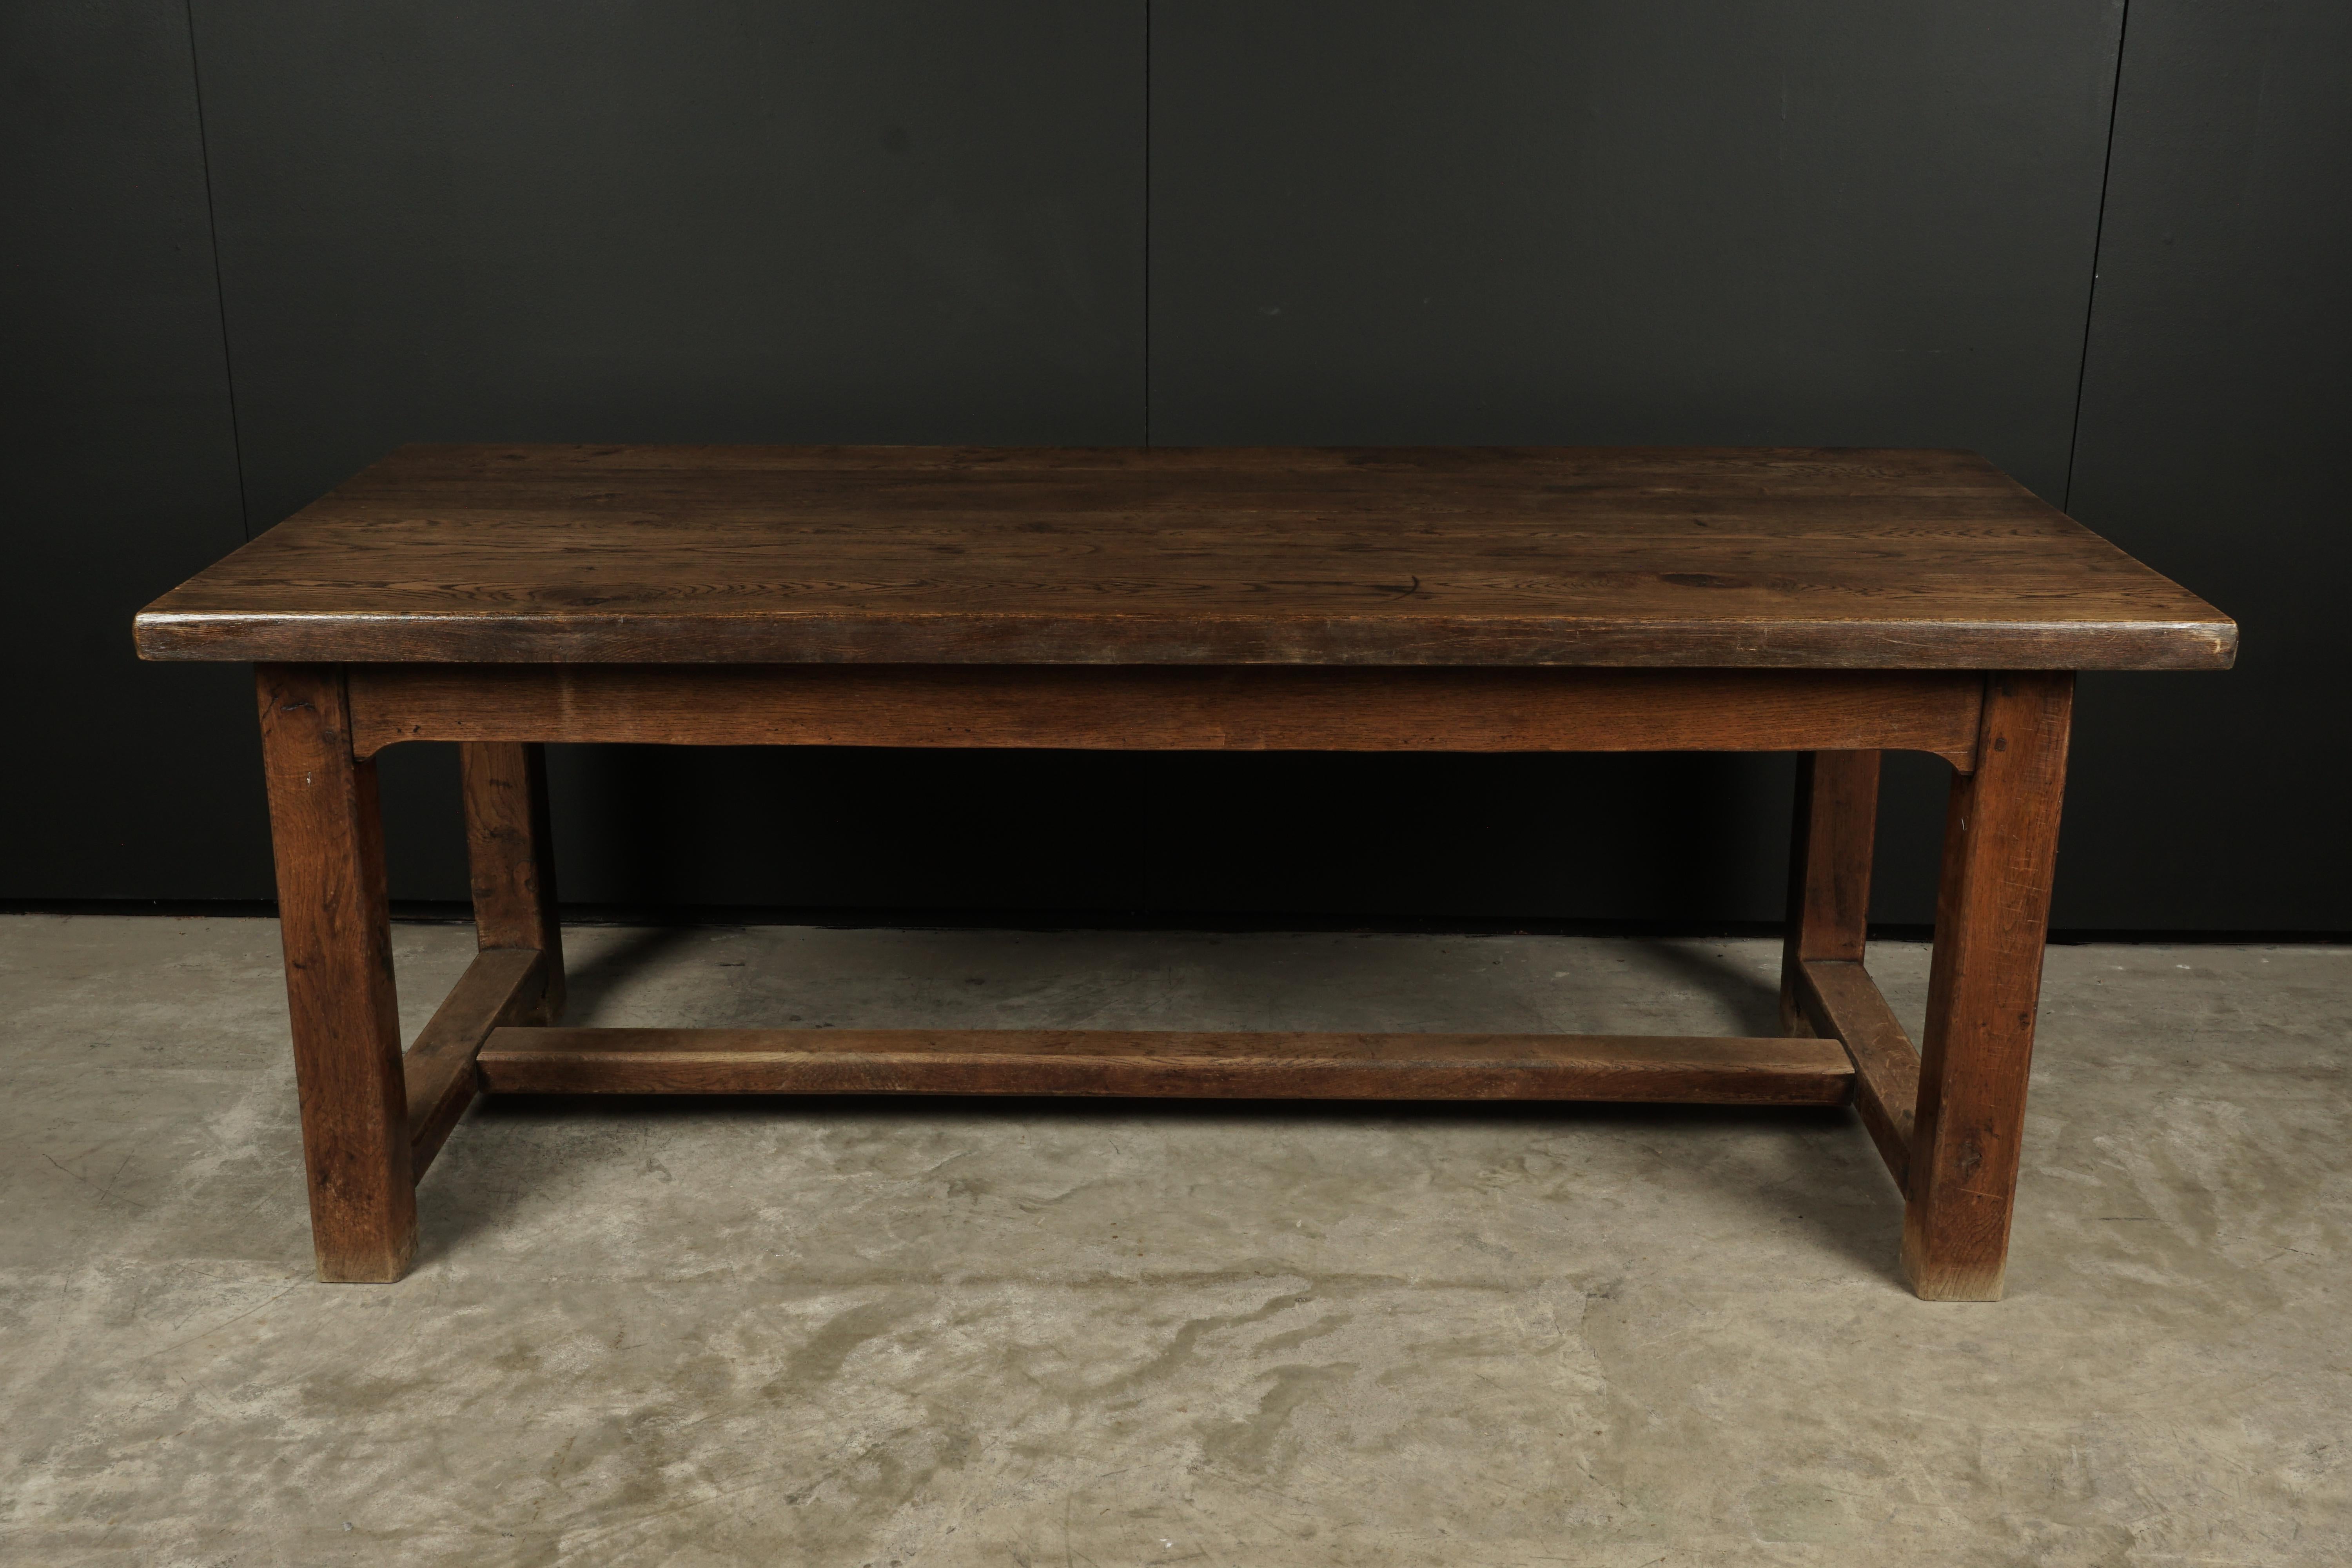 Vintage Large solid oak dining table from France, circa 1940. Solid oak construction with nice wear and patina.